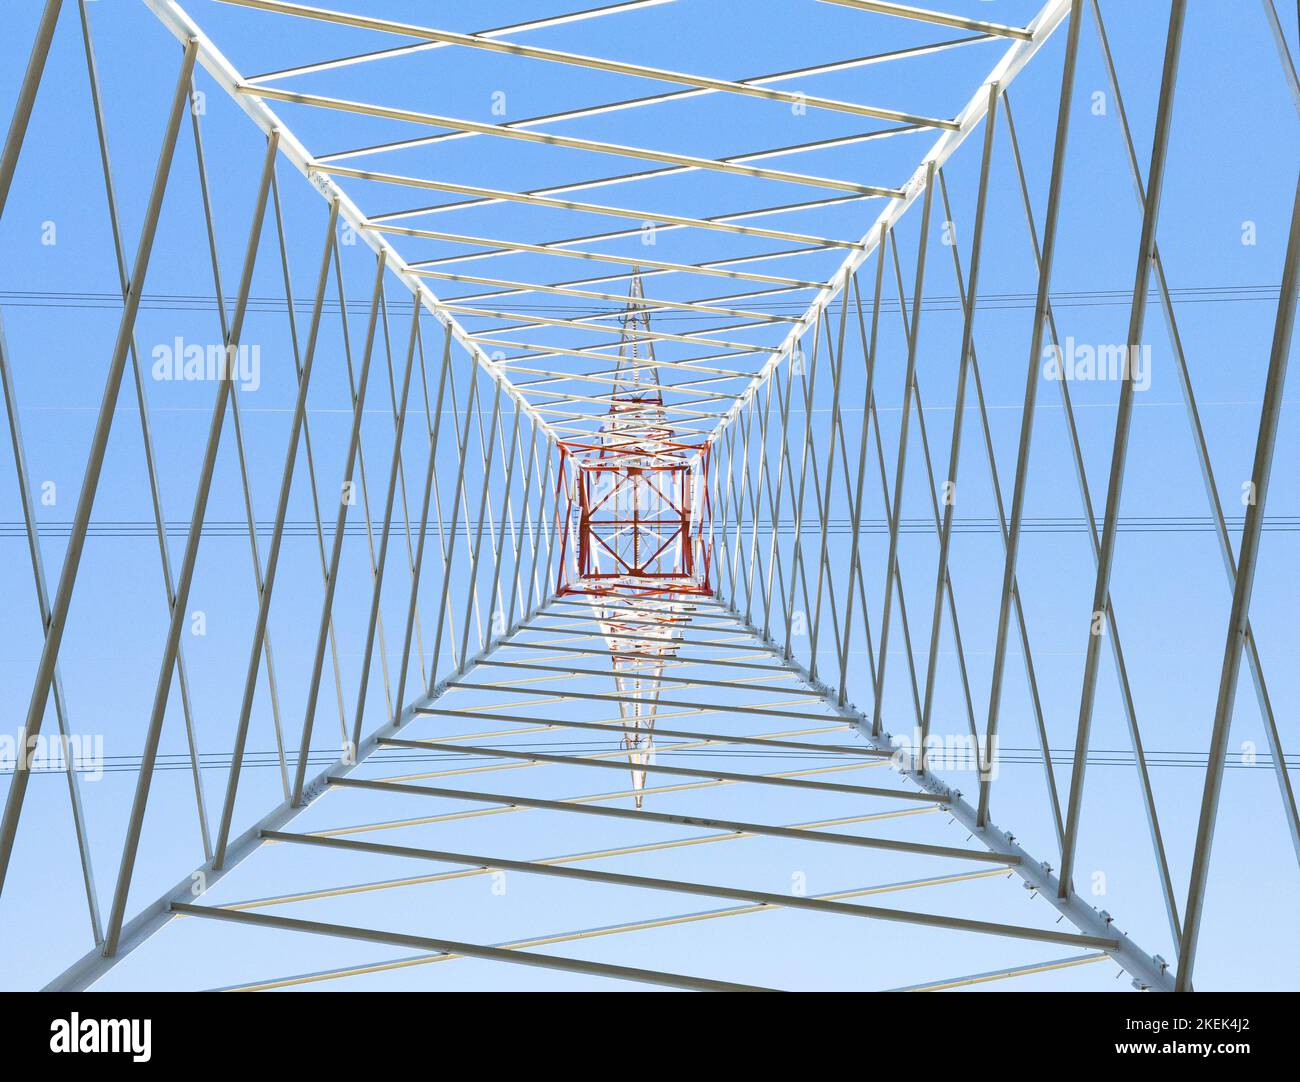 Electric pylon in perspective seen below with light blue background Stock Photo